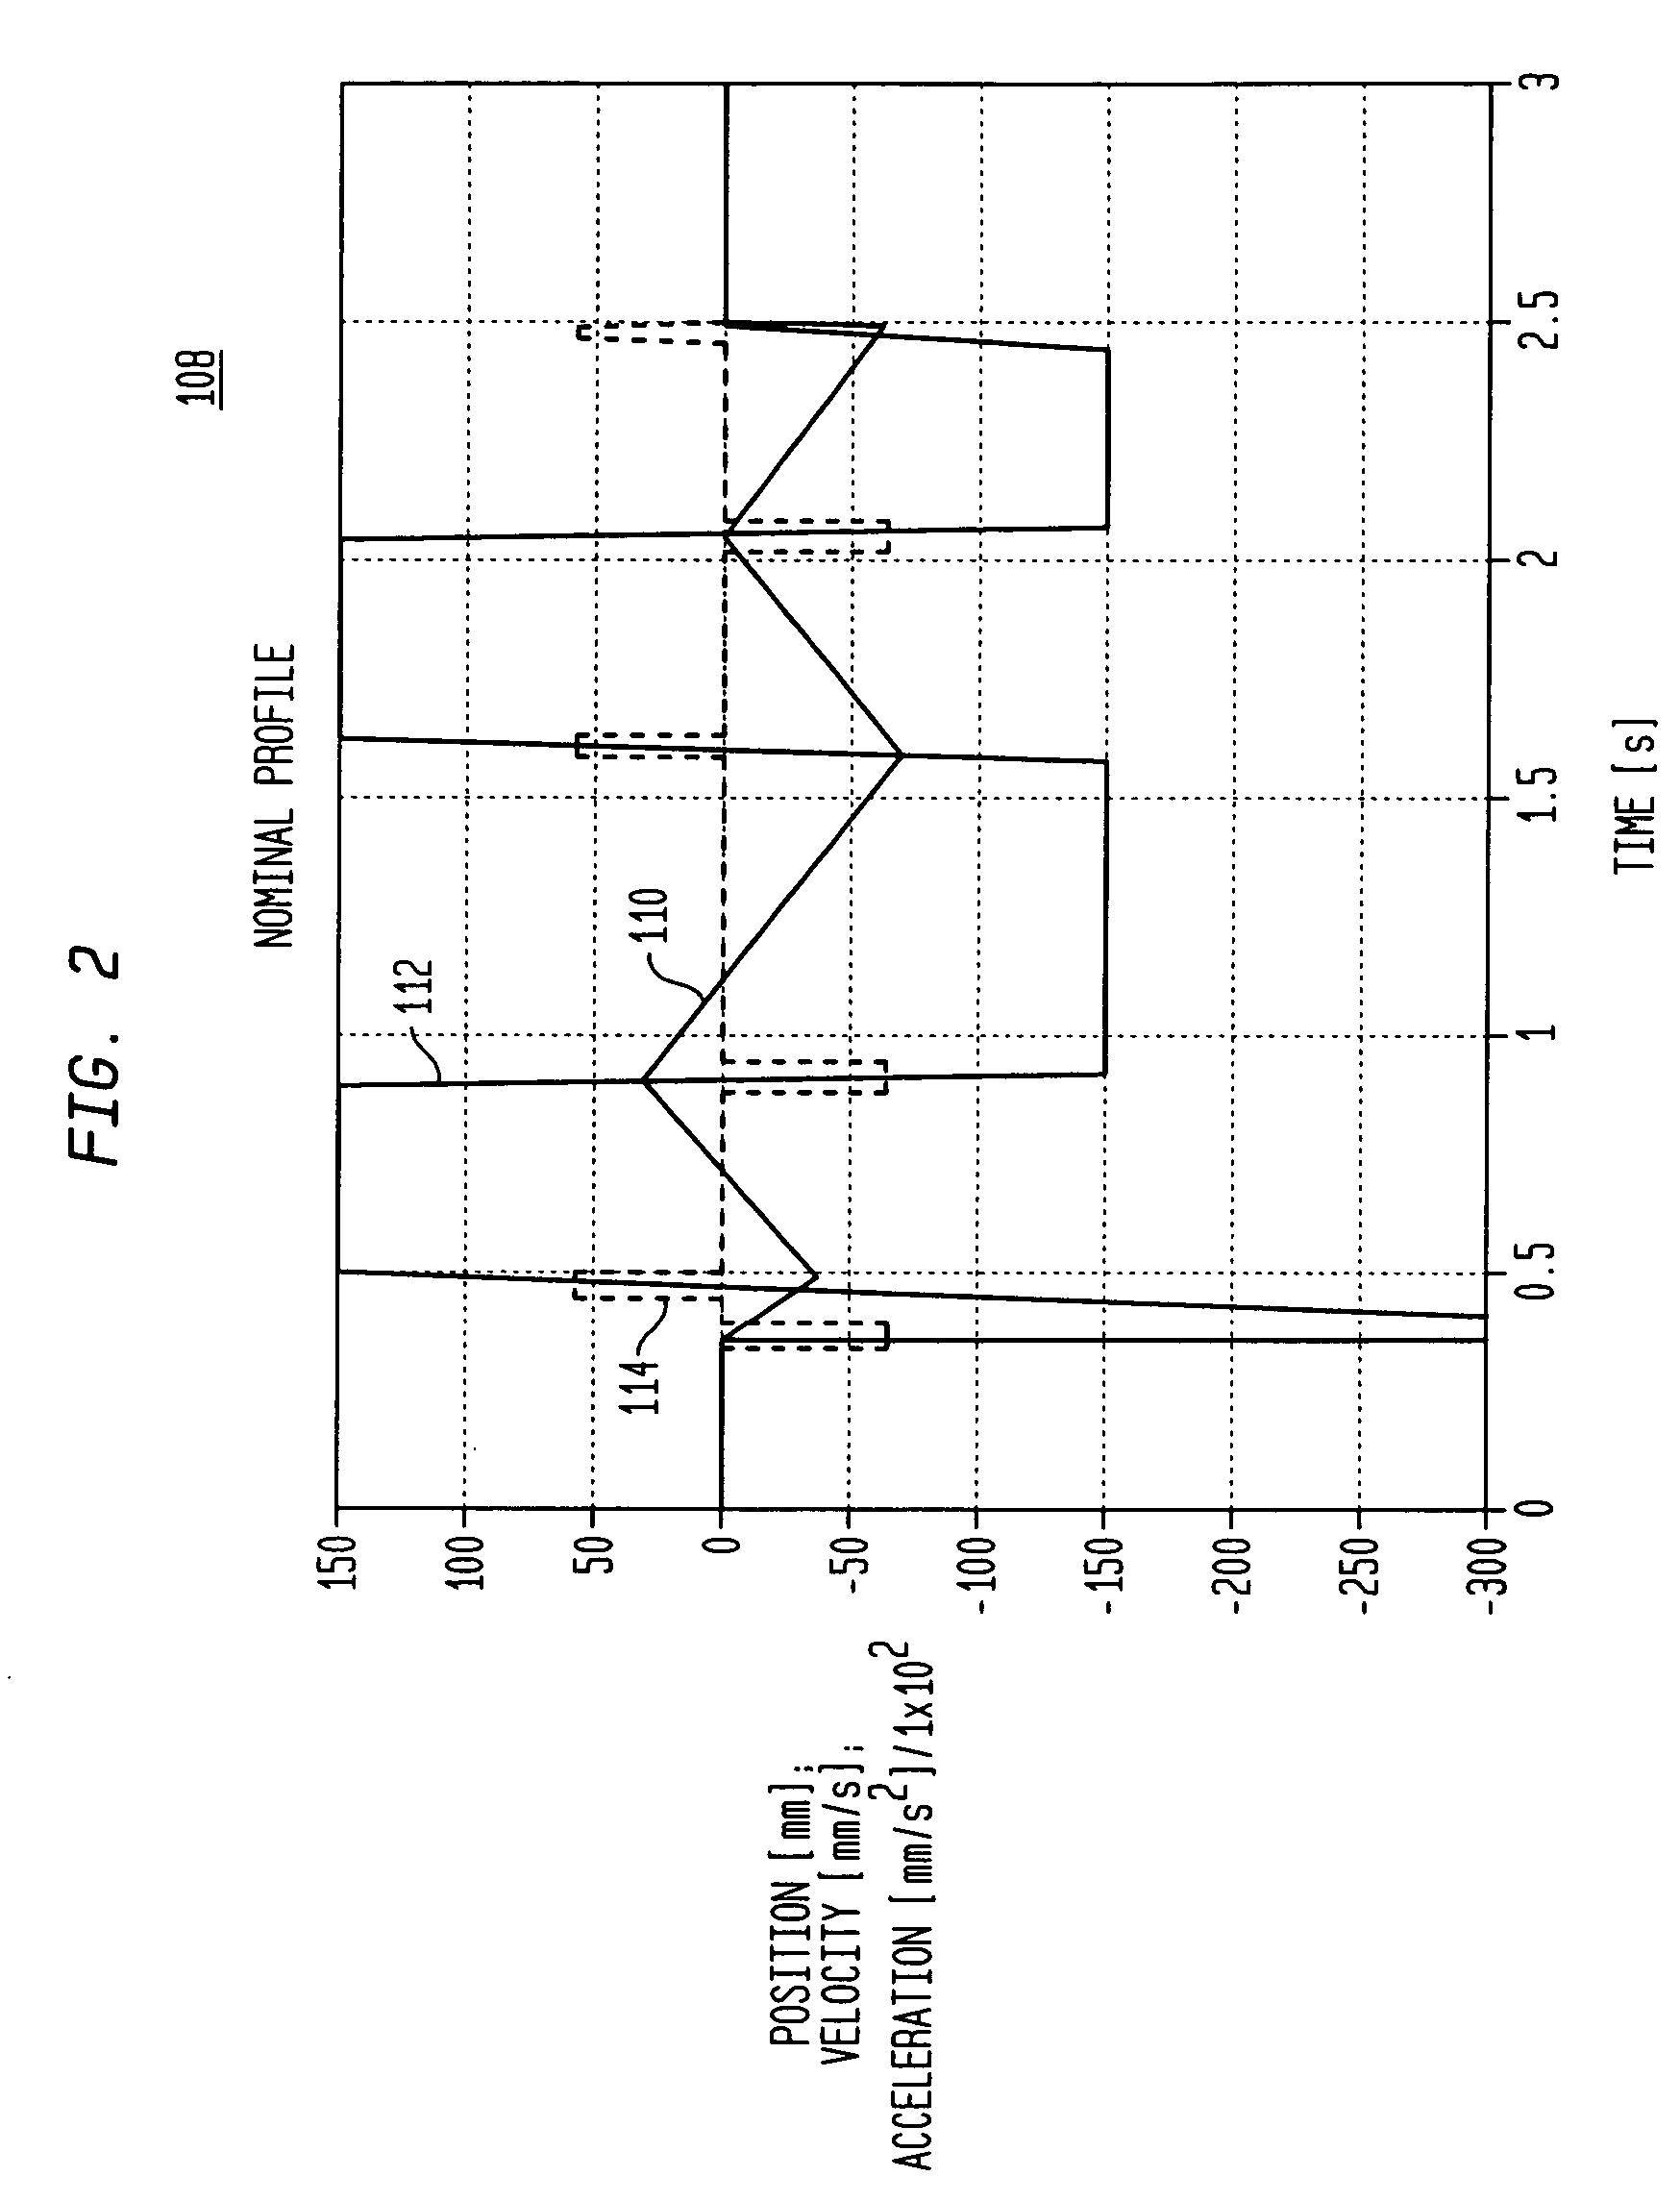 Method and system for processing a discrete time input signal where the clock rate of a discrete time output signal is a multiple of the clock rate of input signal samples